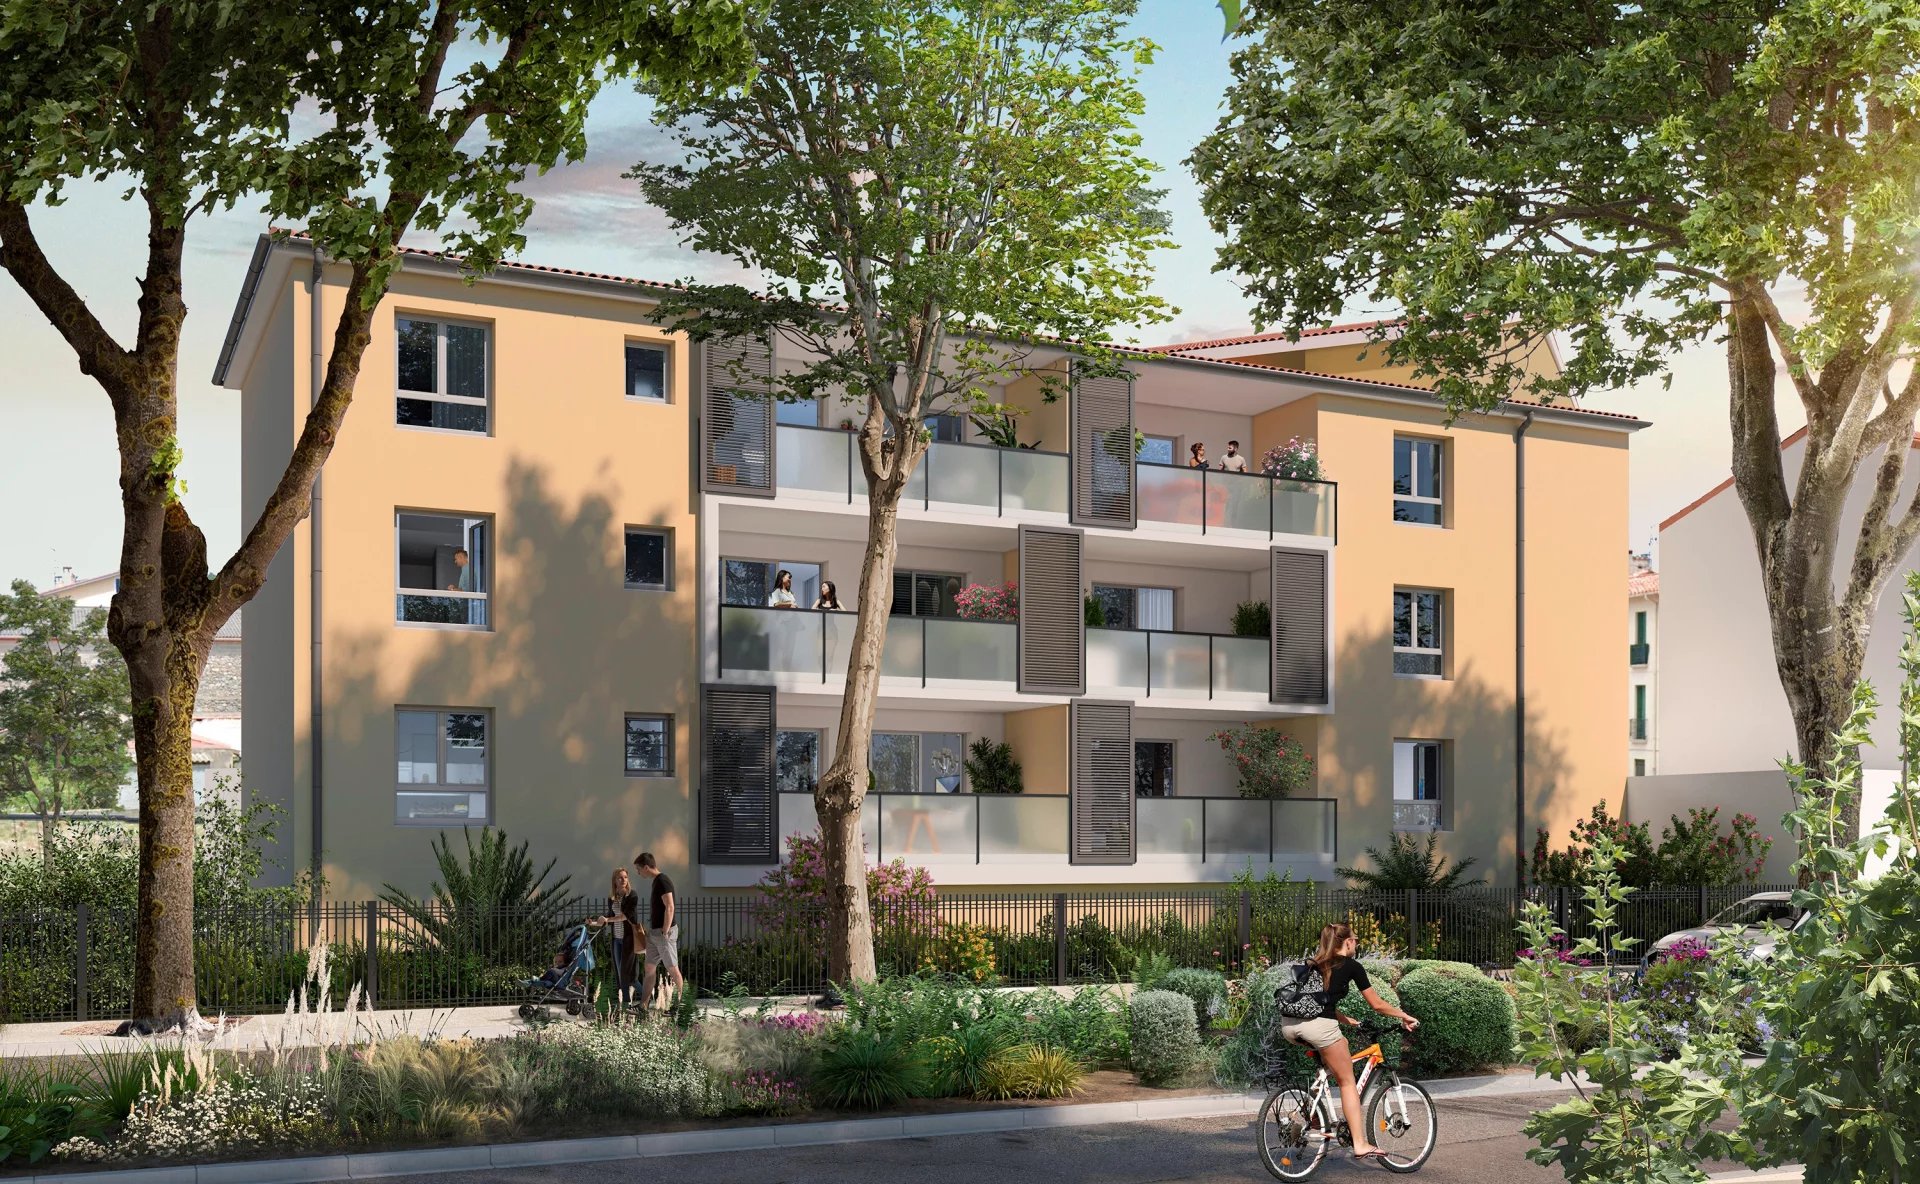 OFF-PLAN 3-BED APPARTMENT (LOT 203), RESIDENCE L'ANGLE DES ARTS, CERET